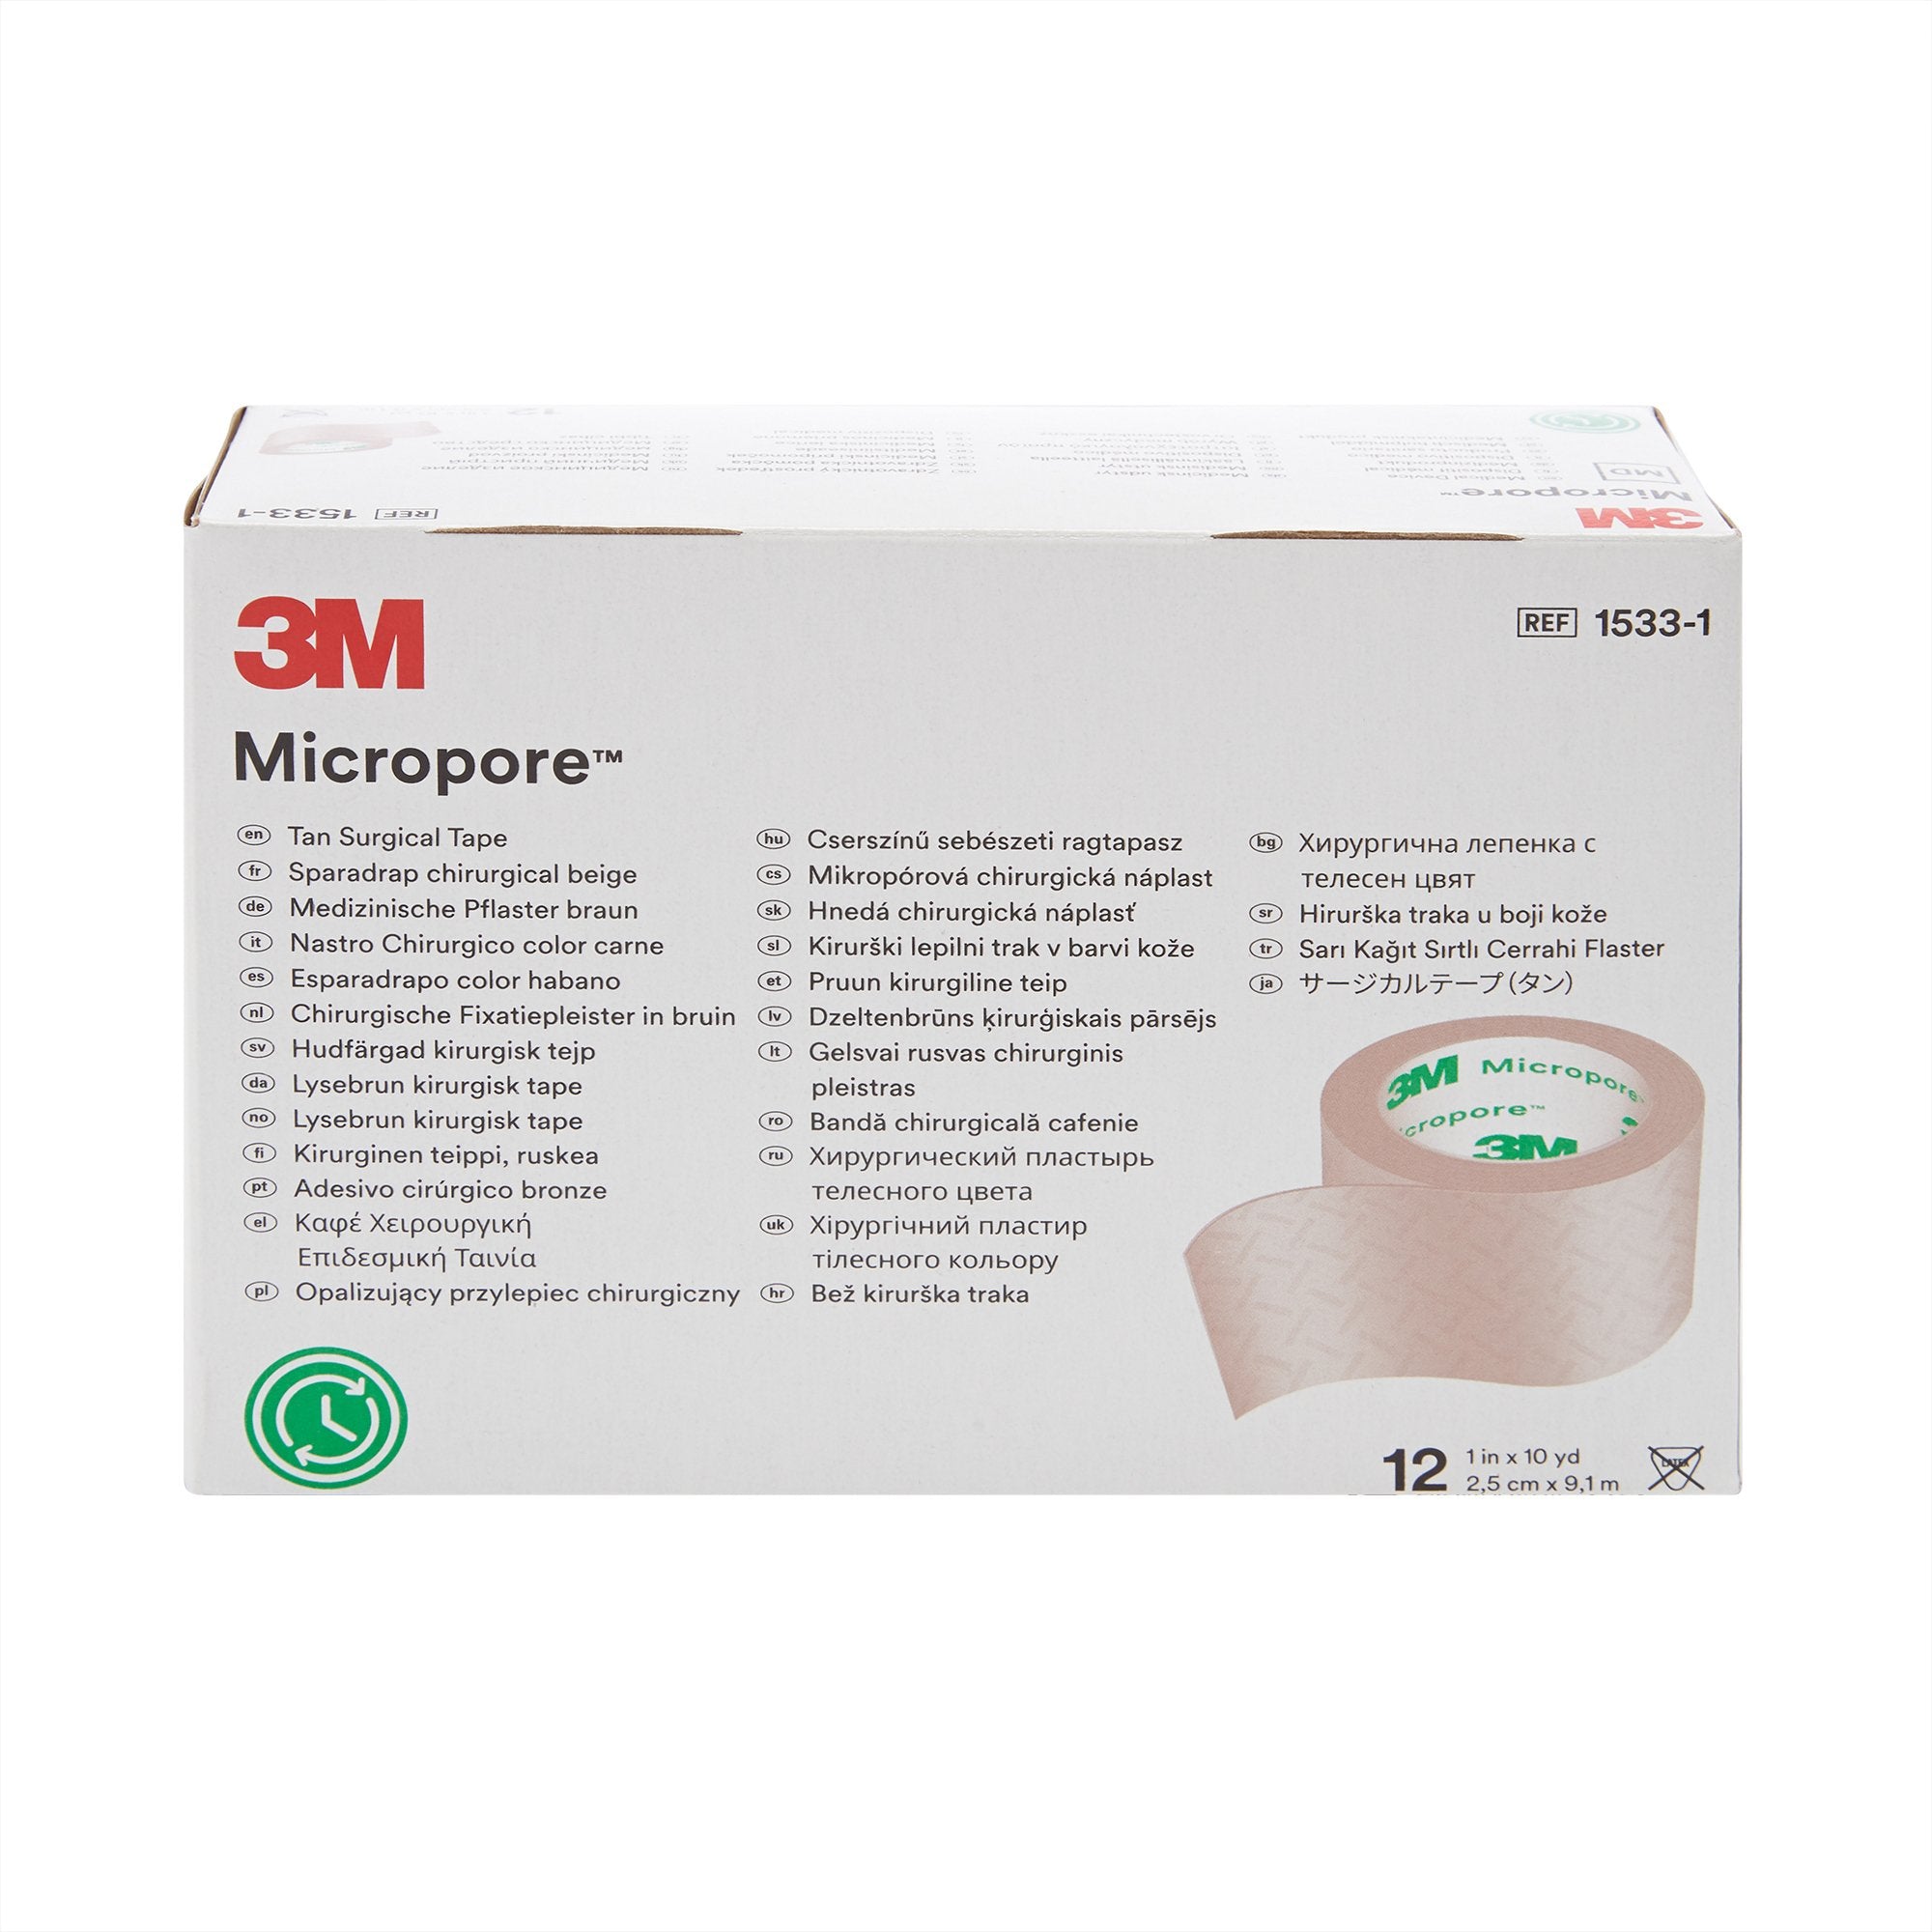 3M Micropore Skin Medical Tape Paper 1 Inch X 10 Yards 120 Ct, White First  Aid Tape, Paper Tape Medical, Adhesive Surgical Tape for Wounds